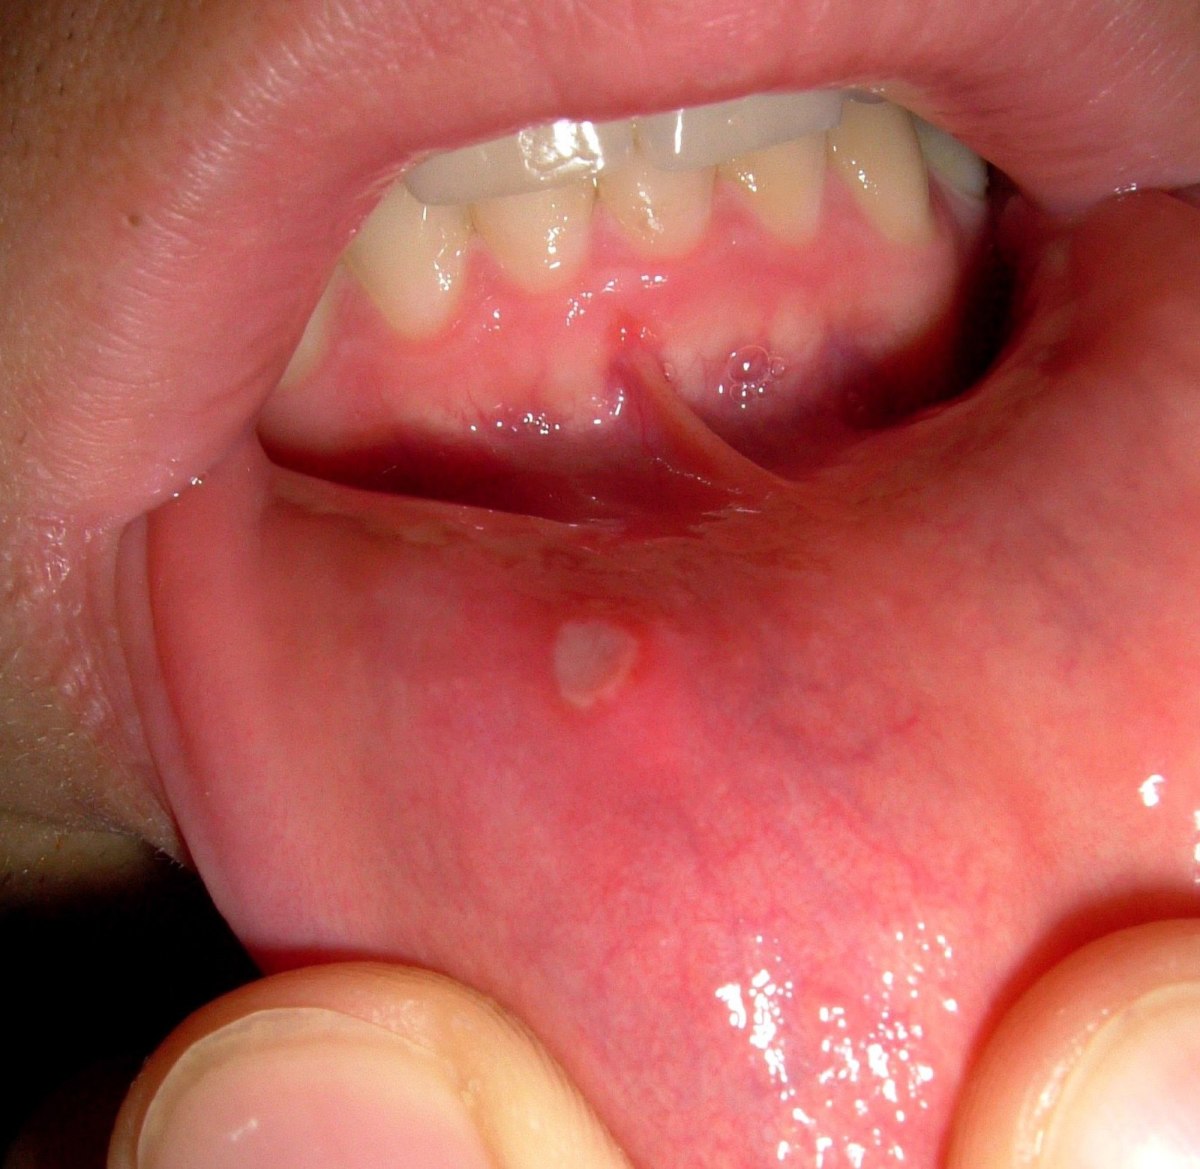 How to Prevent Recurring Canker Sores and Speed up Healing of Those Existing